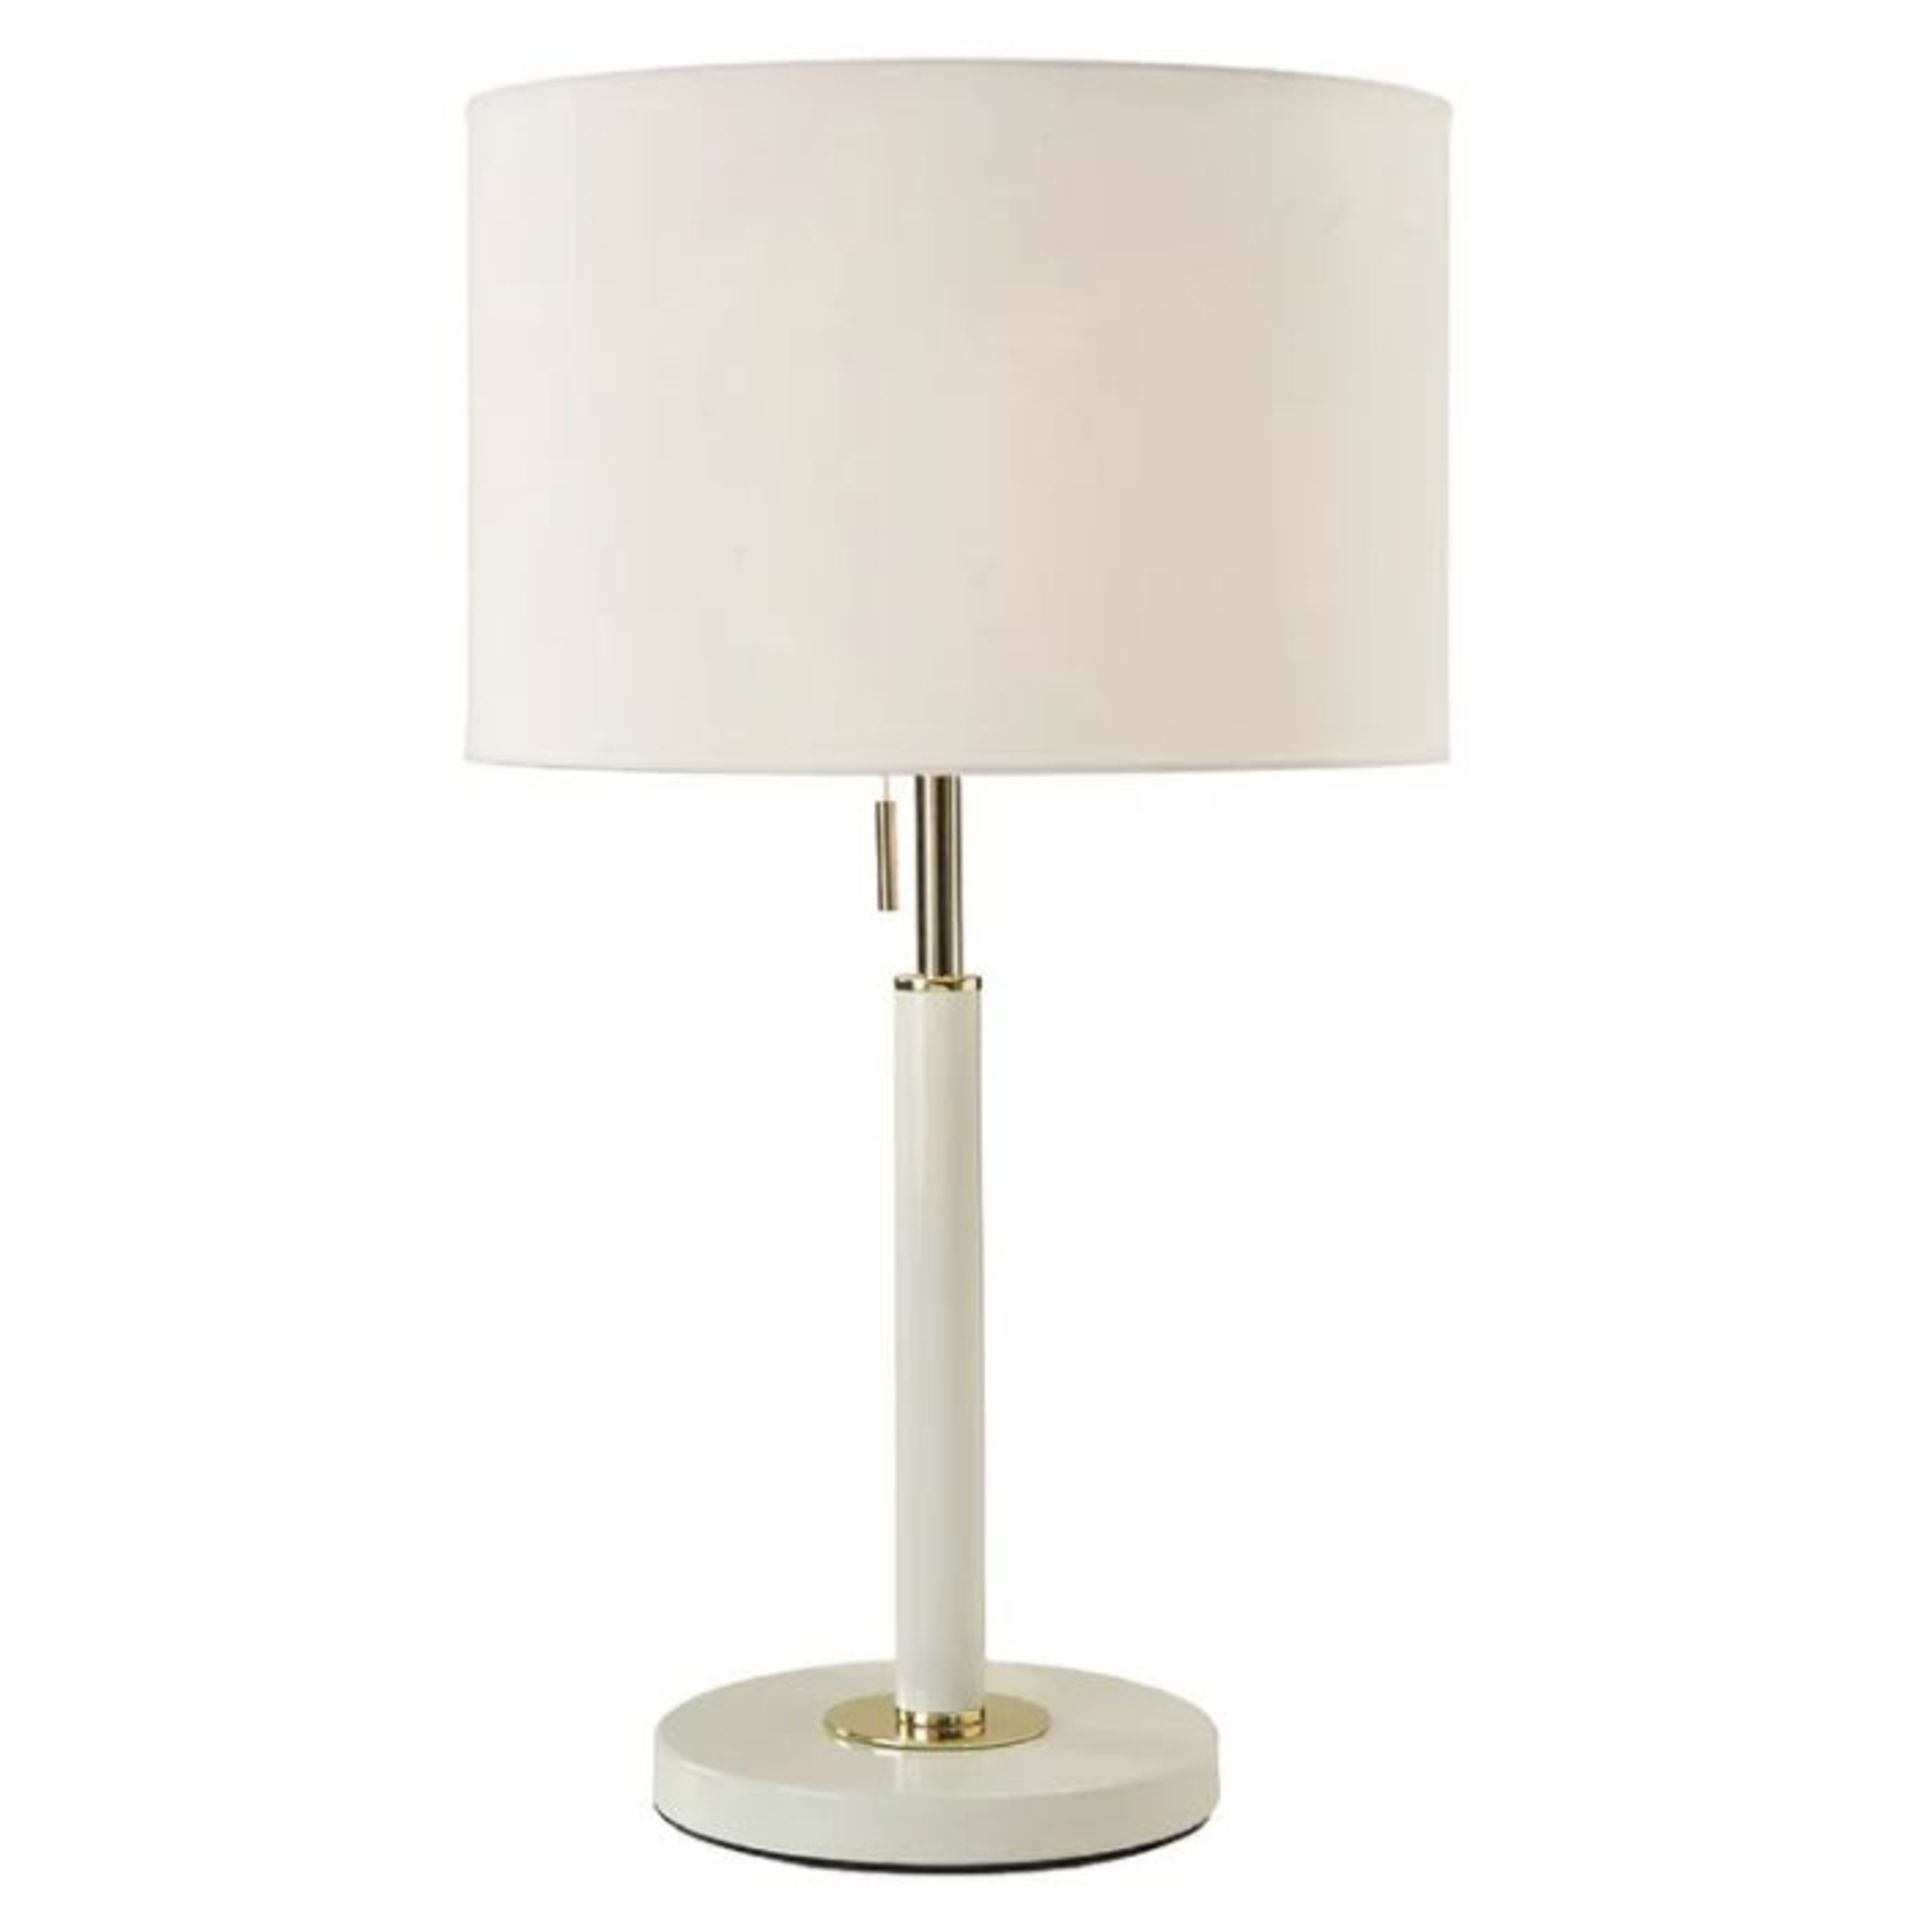 Latitude Run, Gerson 58.5cm Table Lamp (IVORY/GOLD ACCENT & WHITE SHADE - RRP £74.99 (VLJ2412 -